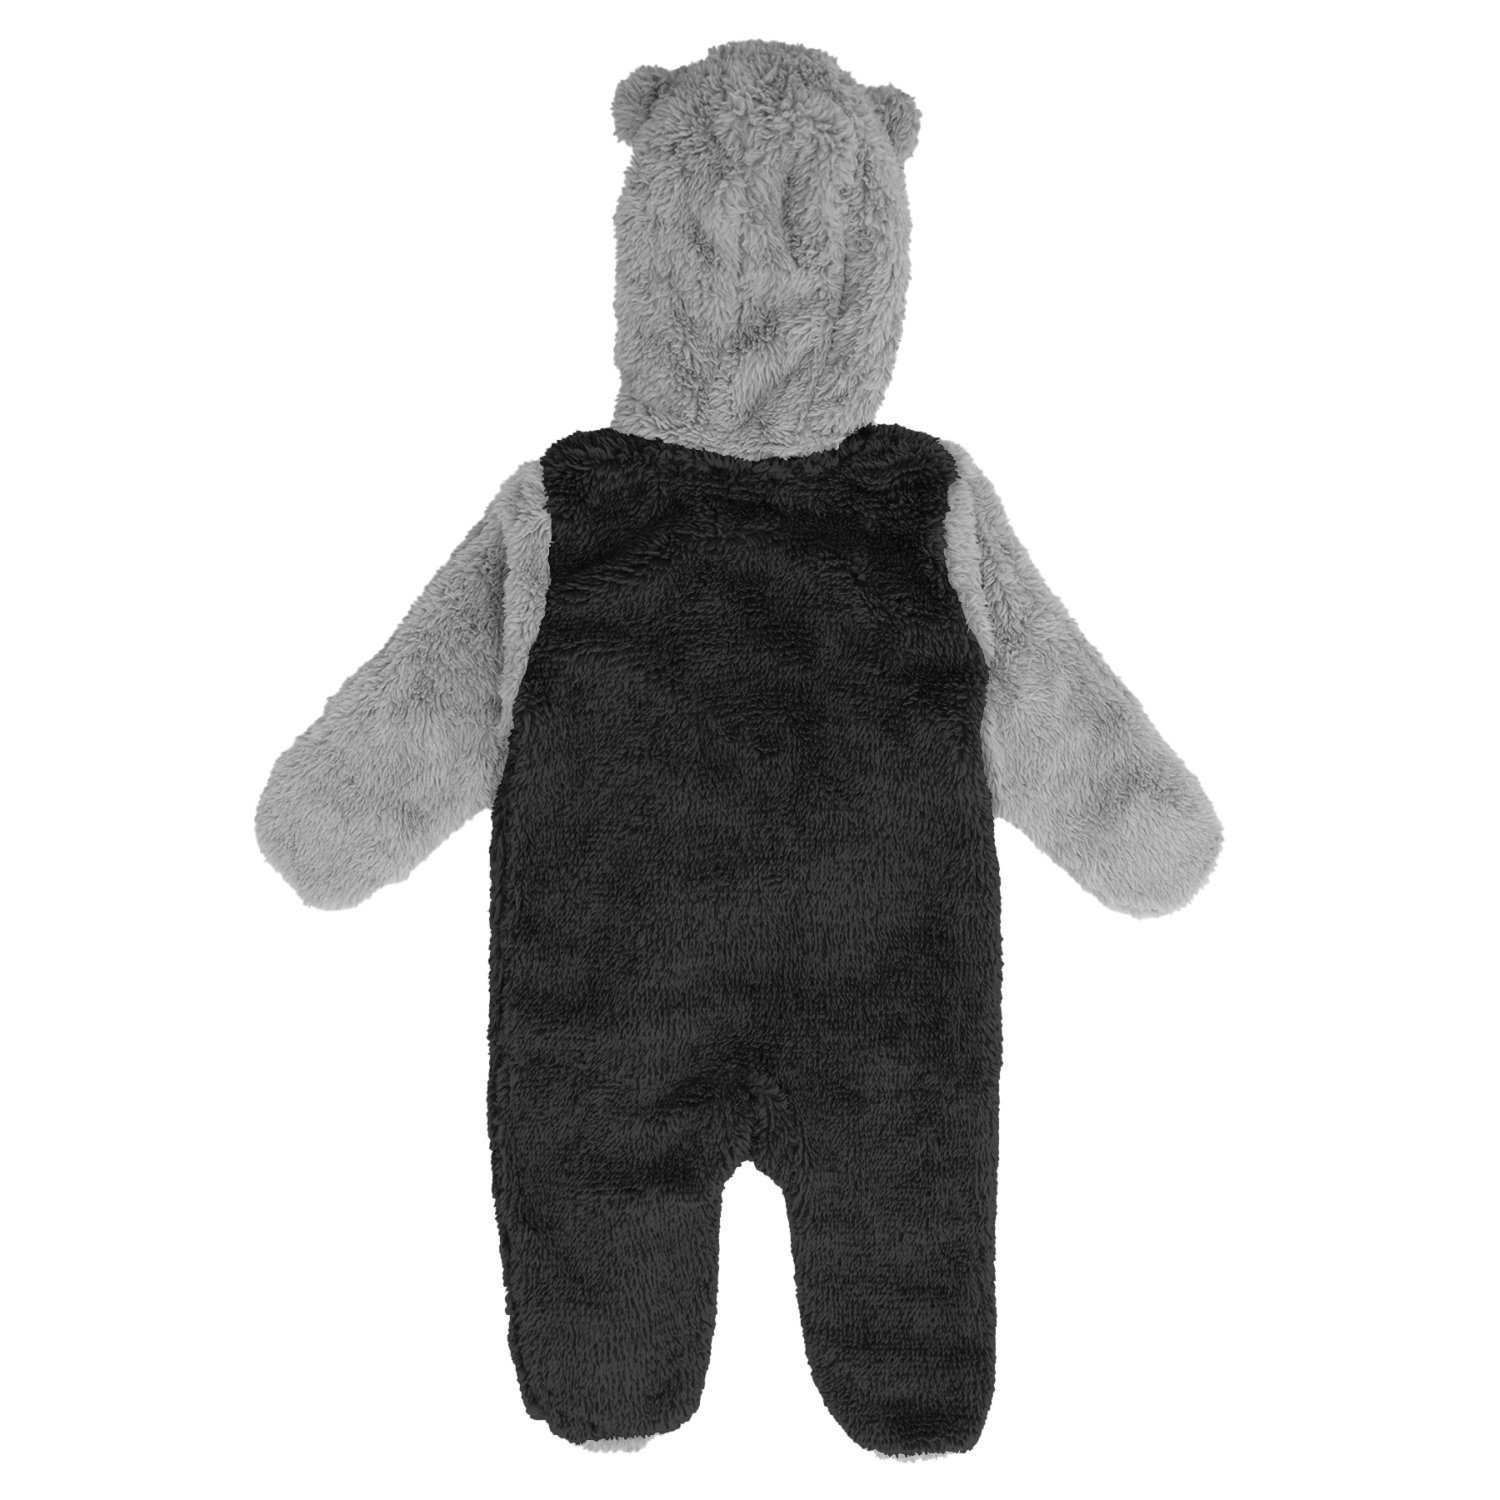 Overall Kapuzenpullover Pittsburgh NFL Steelers Outerstuff Teddy